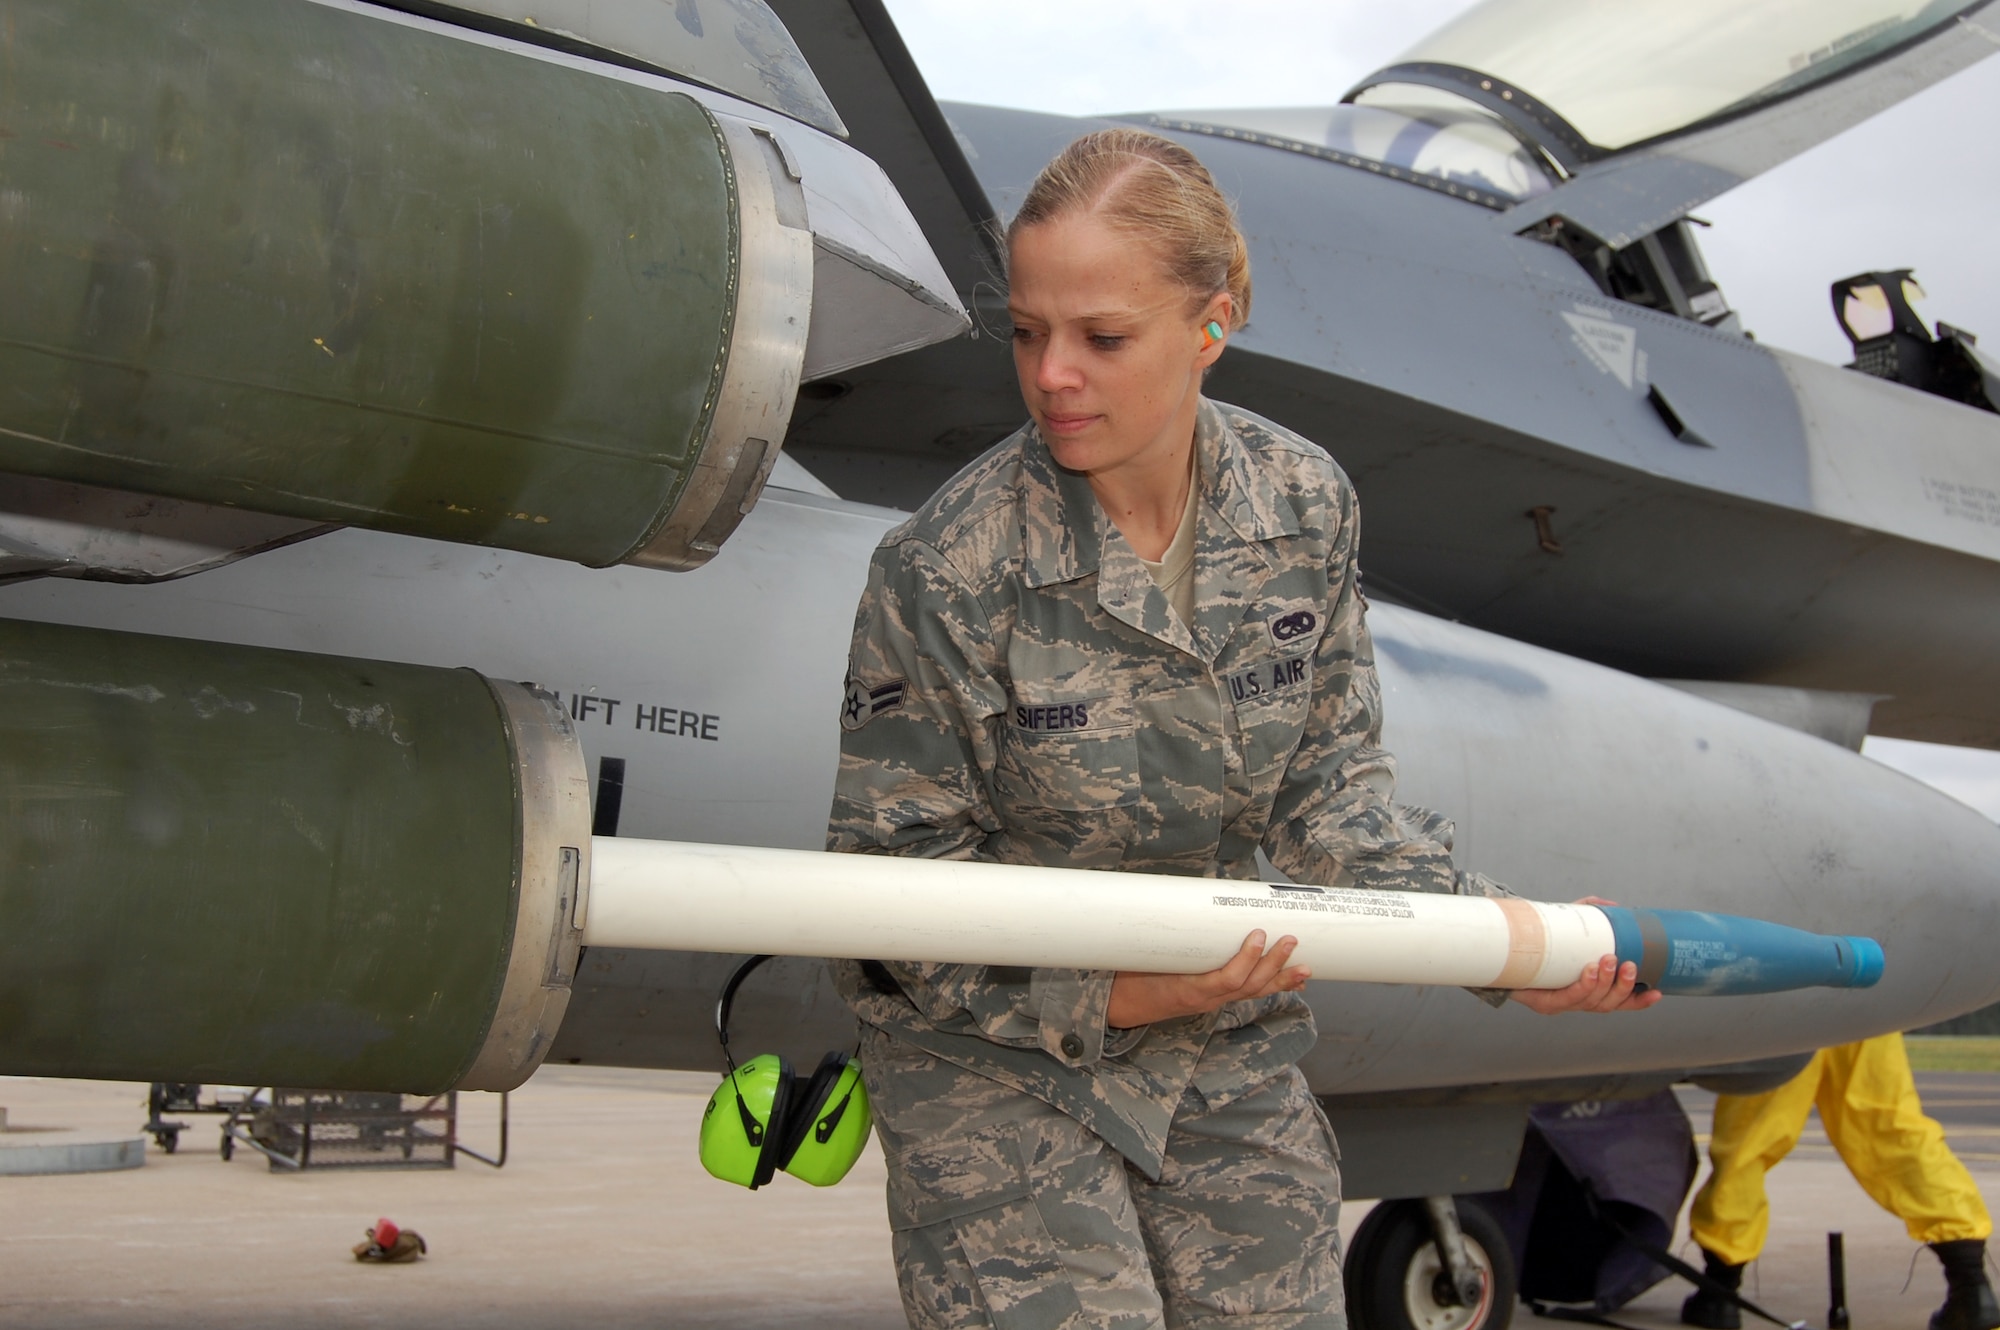 Airman 1st Class Kelly Sifers, 31st Aircraft Maintenance Squadron weapons load crew member, loads a practice rocket onto an F-16 during a training exercise Aug. 4, 2010 at Kallax Air Base, Sweden. The 555th Fighter Squadron and 31st AMXS conducted more than 180 air-to-air and air-to-ground missions during a two week exercise at the air base in which they worked alongside the Swedish air force's Norrbotten Wing. (U.S. Air Force photo by Tech. Sgt. Lindsey Maurice/Released)